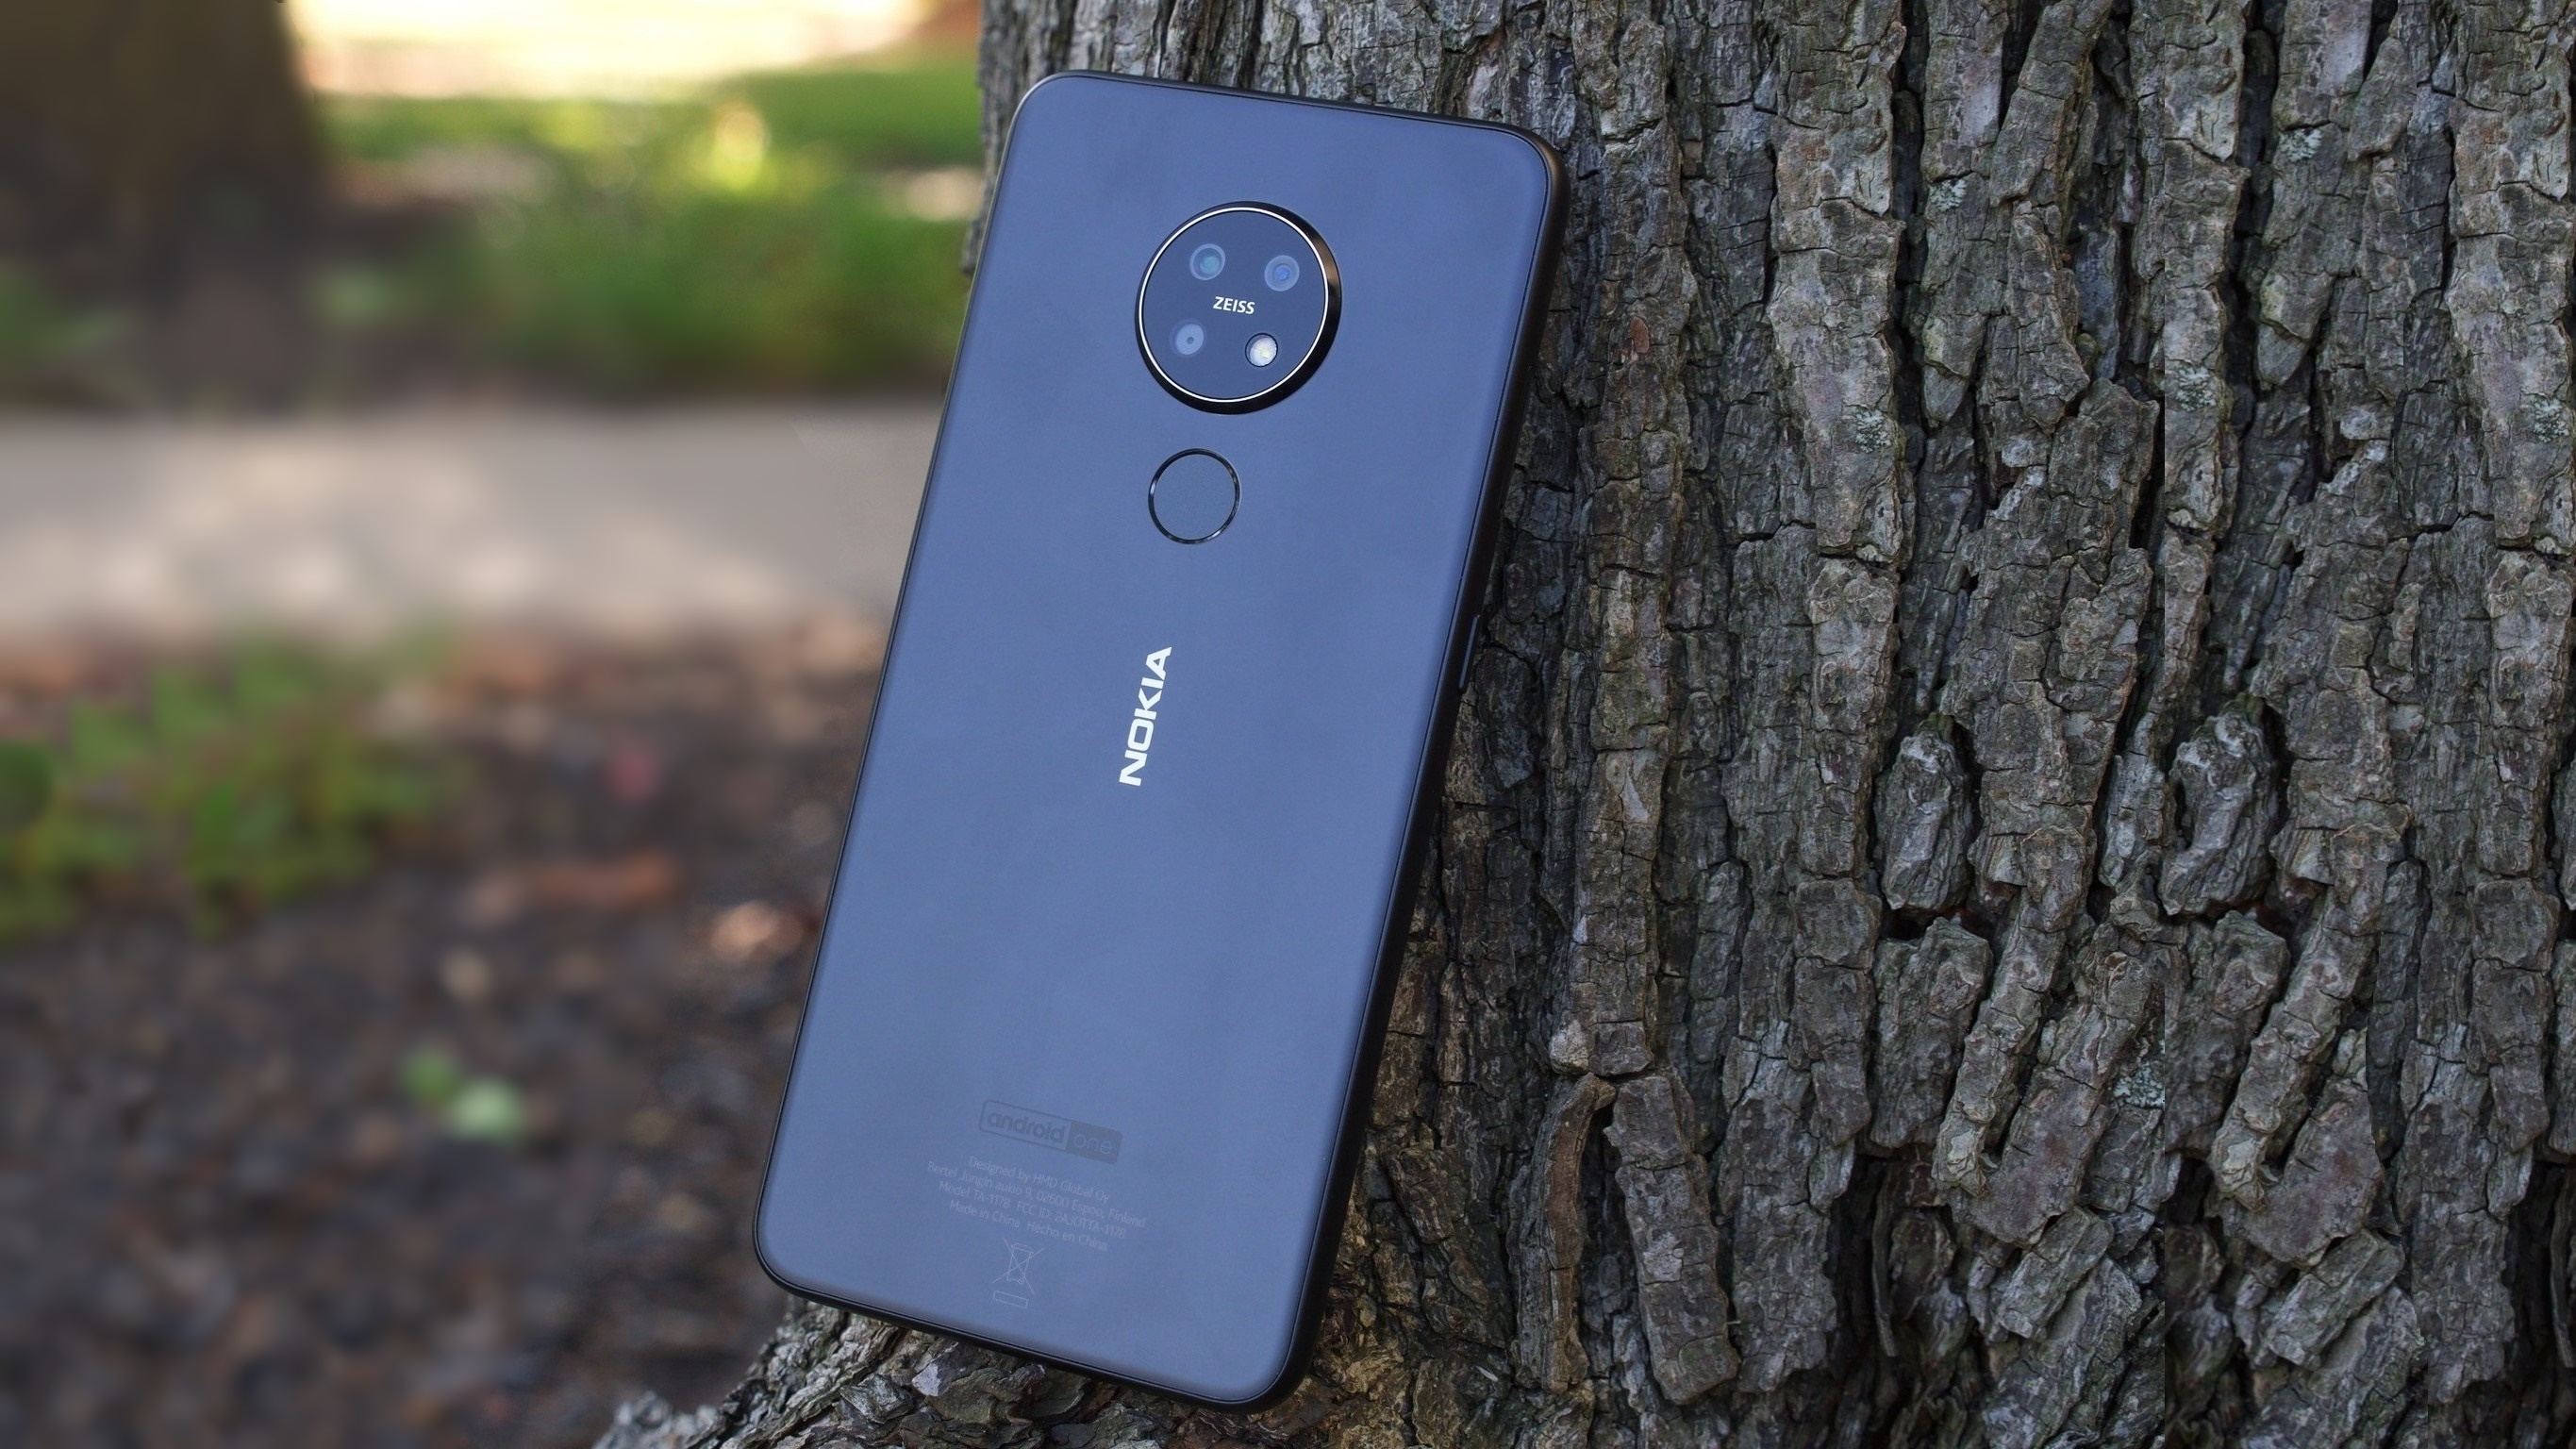 Nokia 7.2 standing upright leaning against a tree outdoors showing off its back